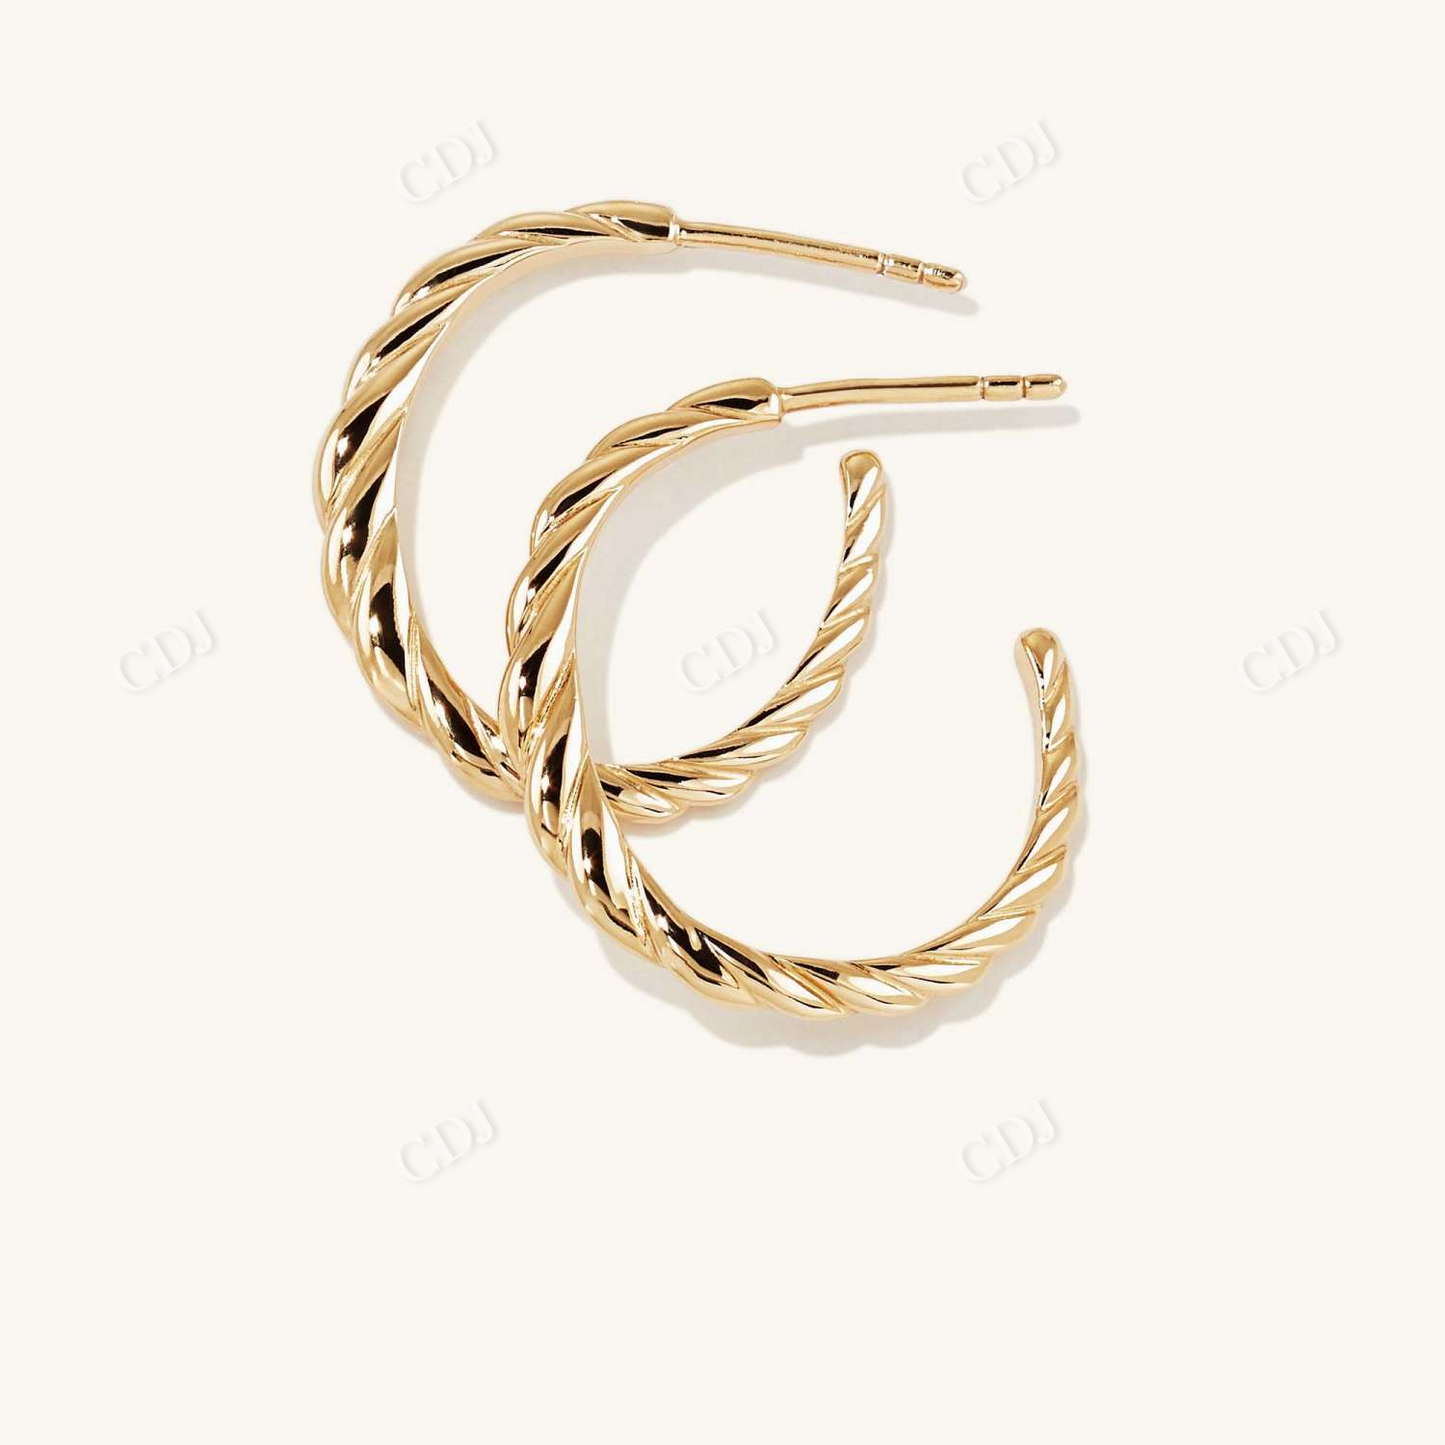 Thin Croissant Dome Hoops Earrings